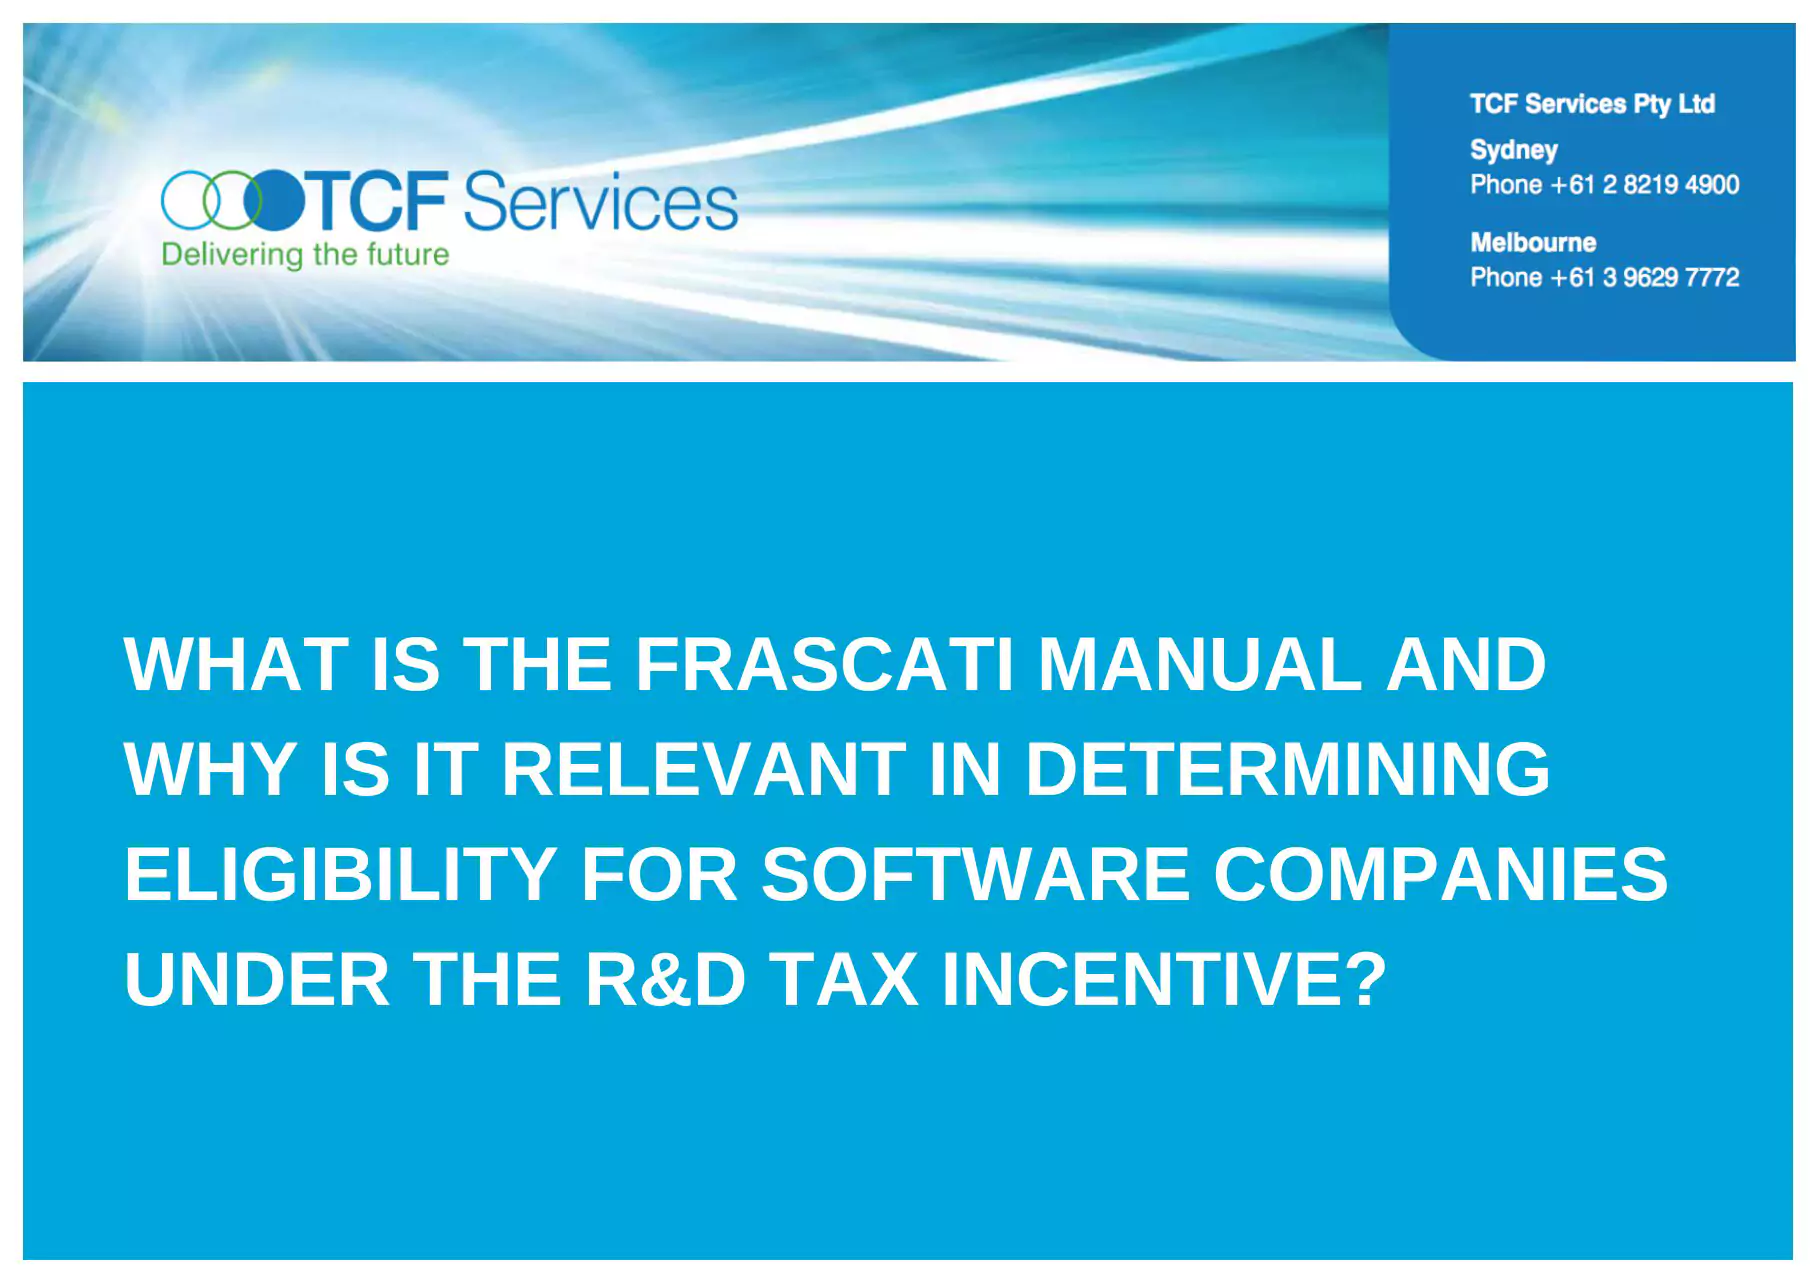 What is the Frascati Manual and why is it relevant in determining eligibility for Software Companies under the R&D Tax Incentive?